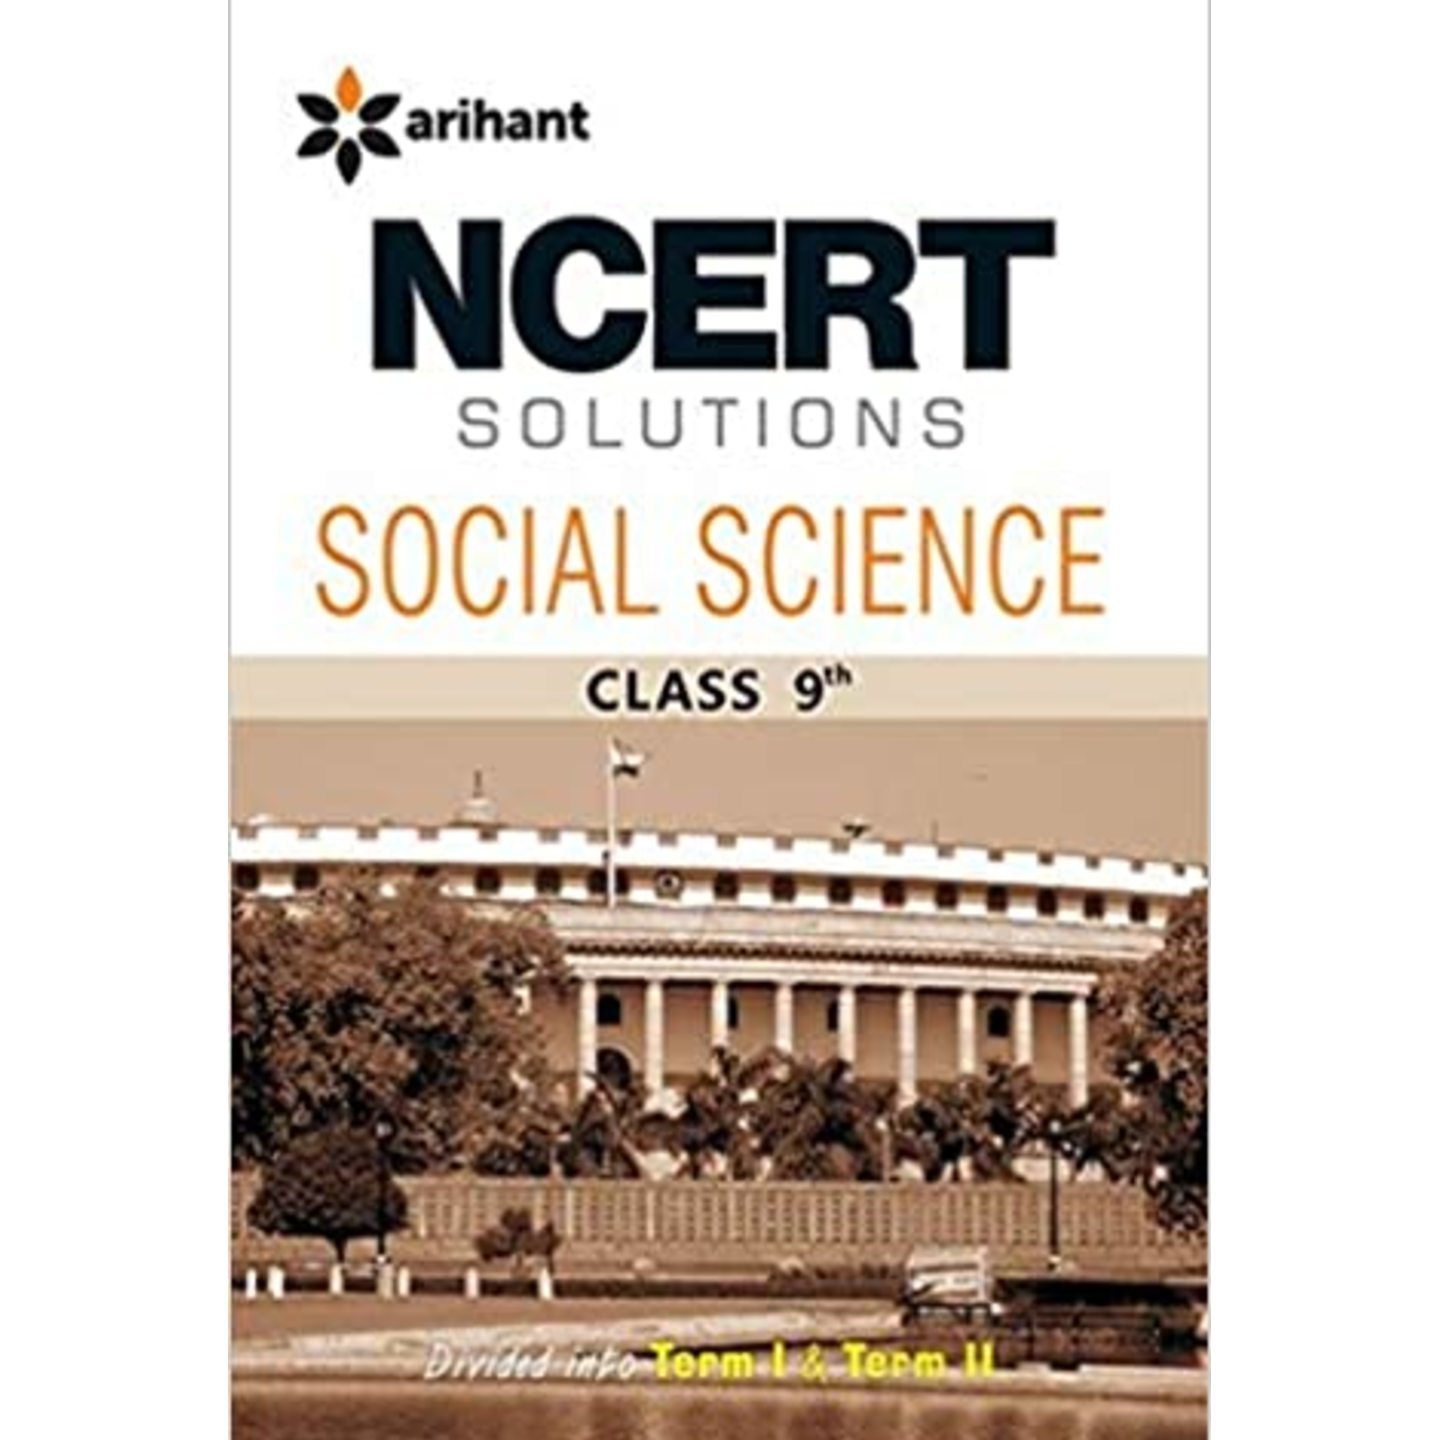 ARIHANT NCERT Solutions - Social Science for Class 9th